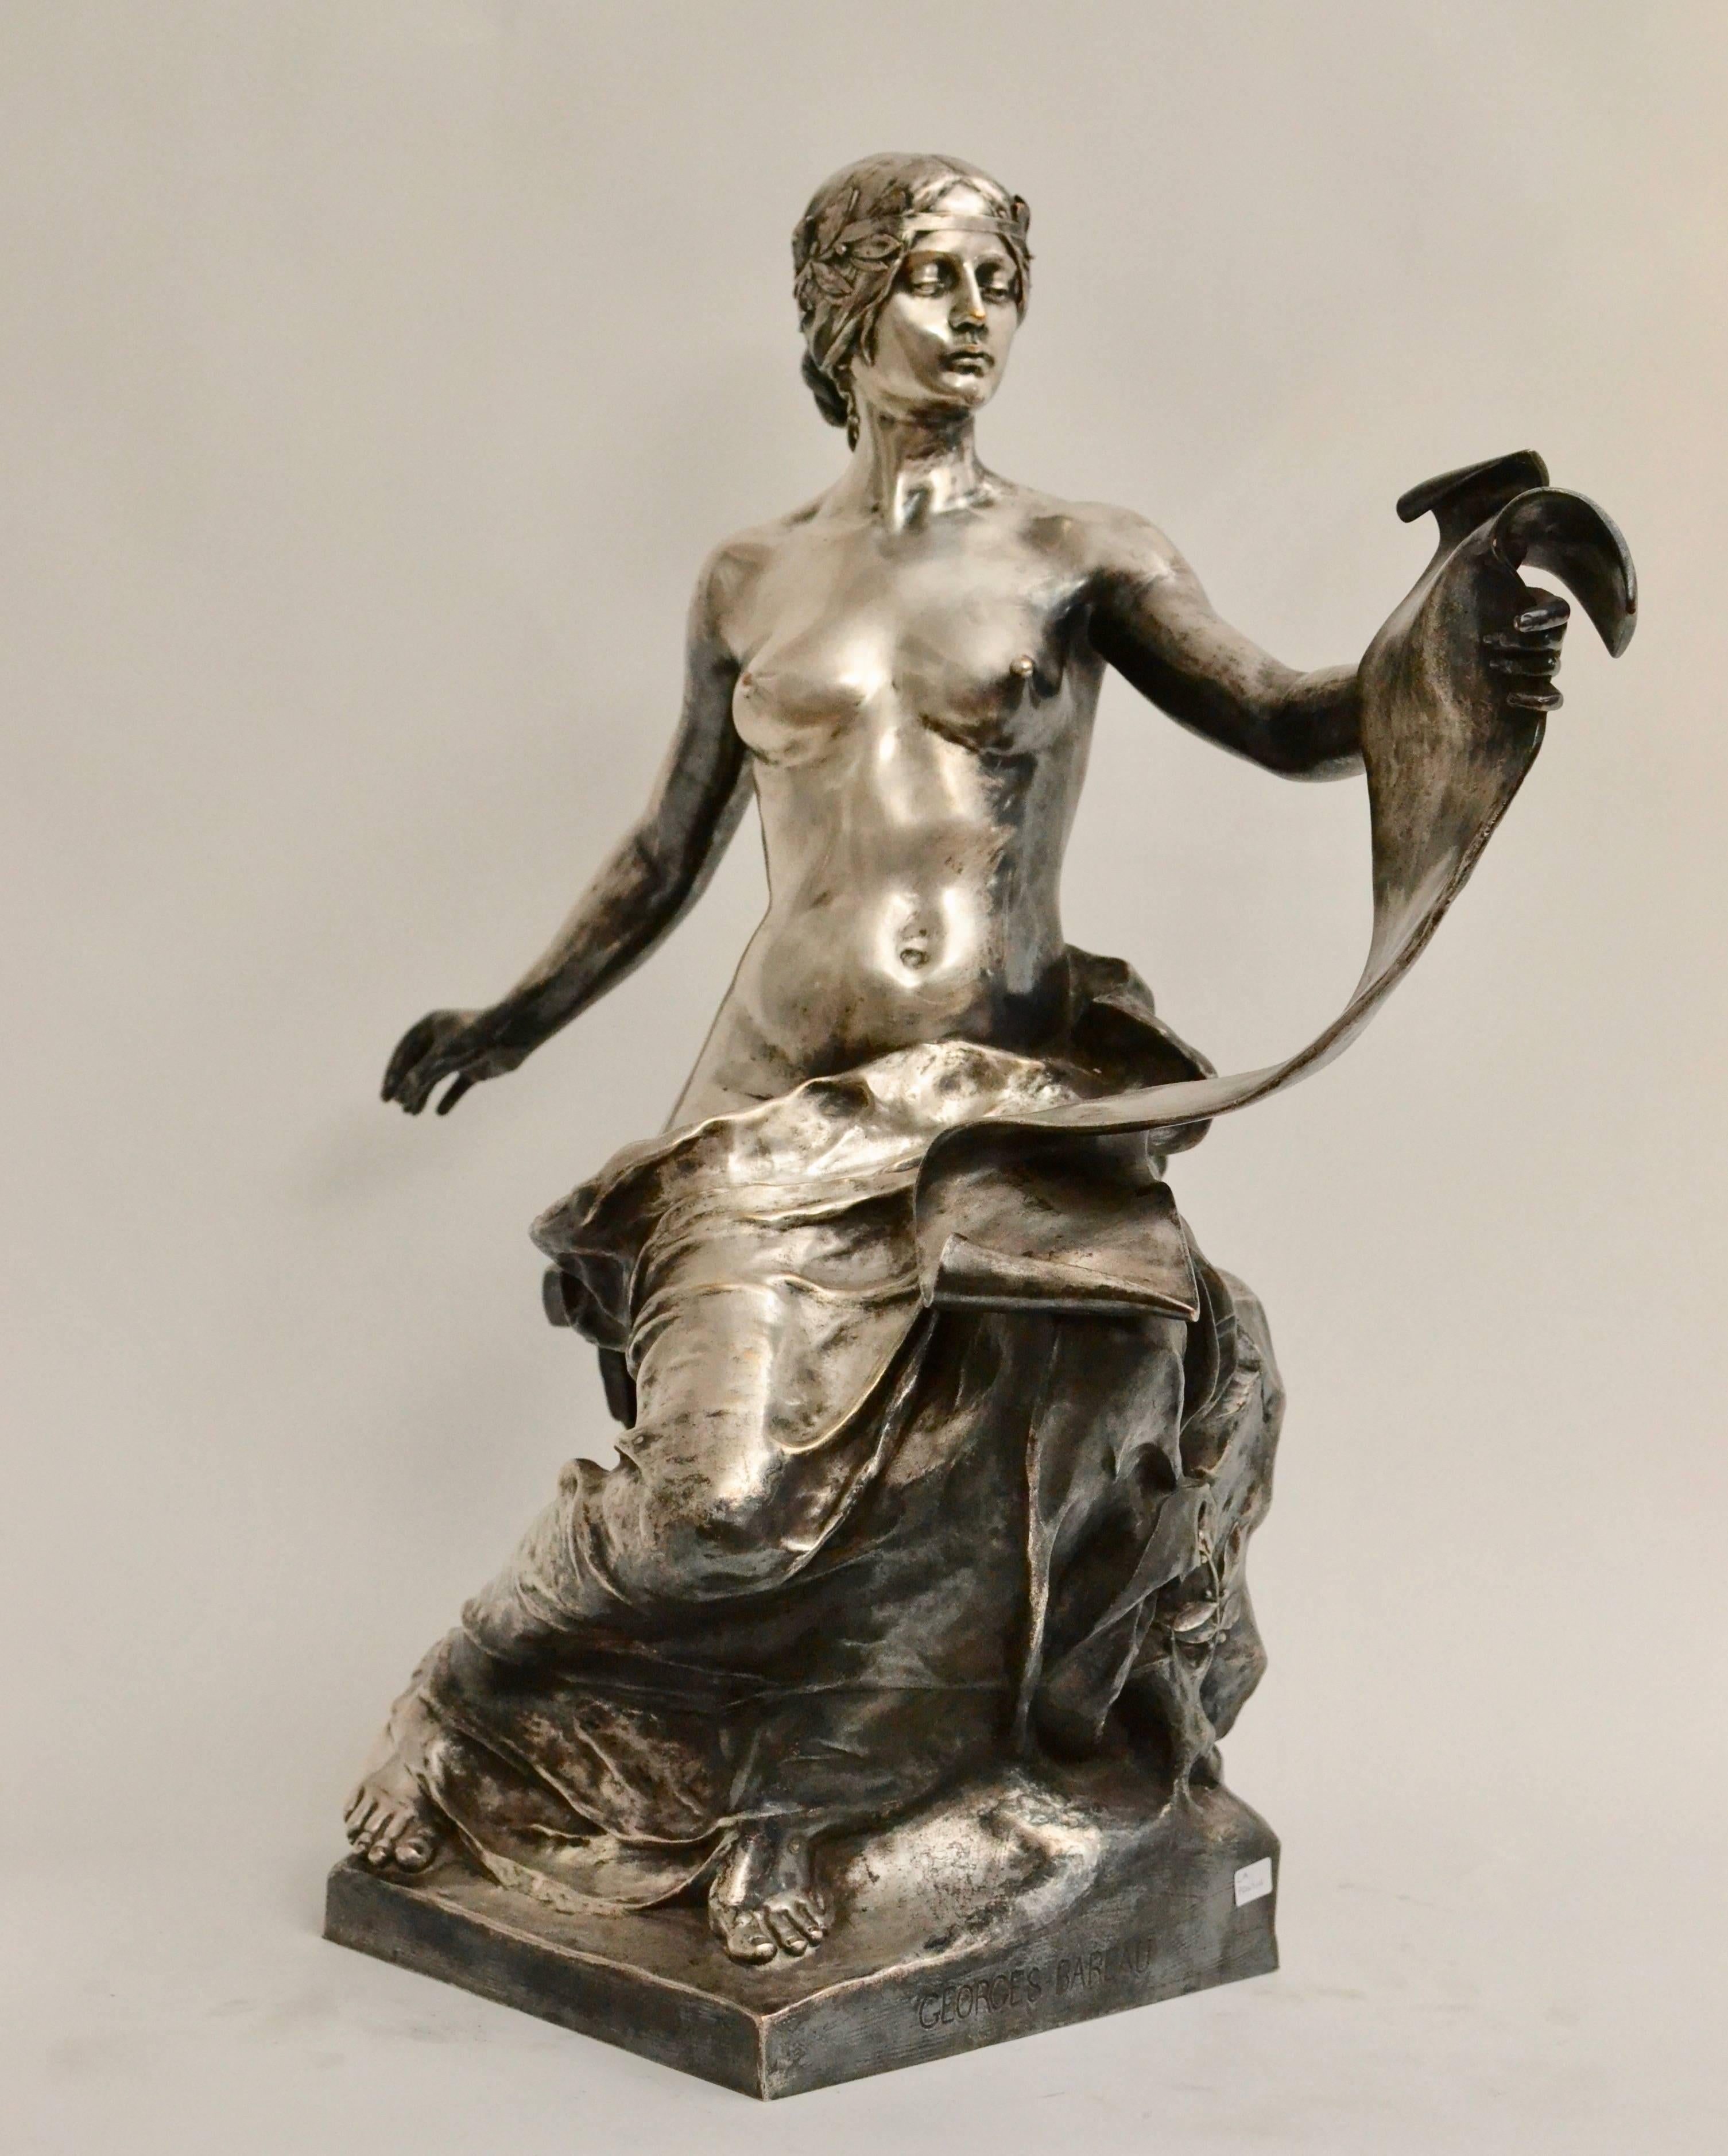 Georges-Marie-Valentin Bareau,
1866-1931,
French.
La Poesie (Poetry)
signed: Georges-Bareau inscribed: F BARBEDIENNE Fondeur and with the Réduction Mécanique A.COLLAS BREVETÉ pastille
Silver plated bronze.
 